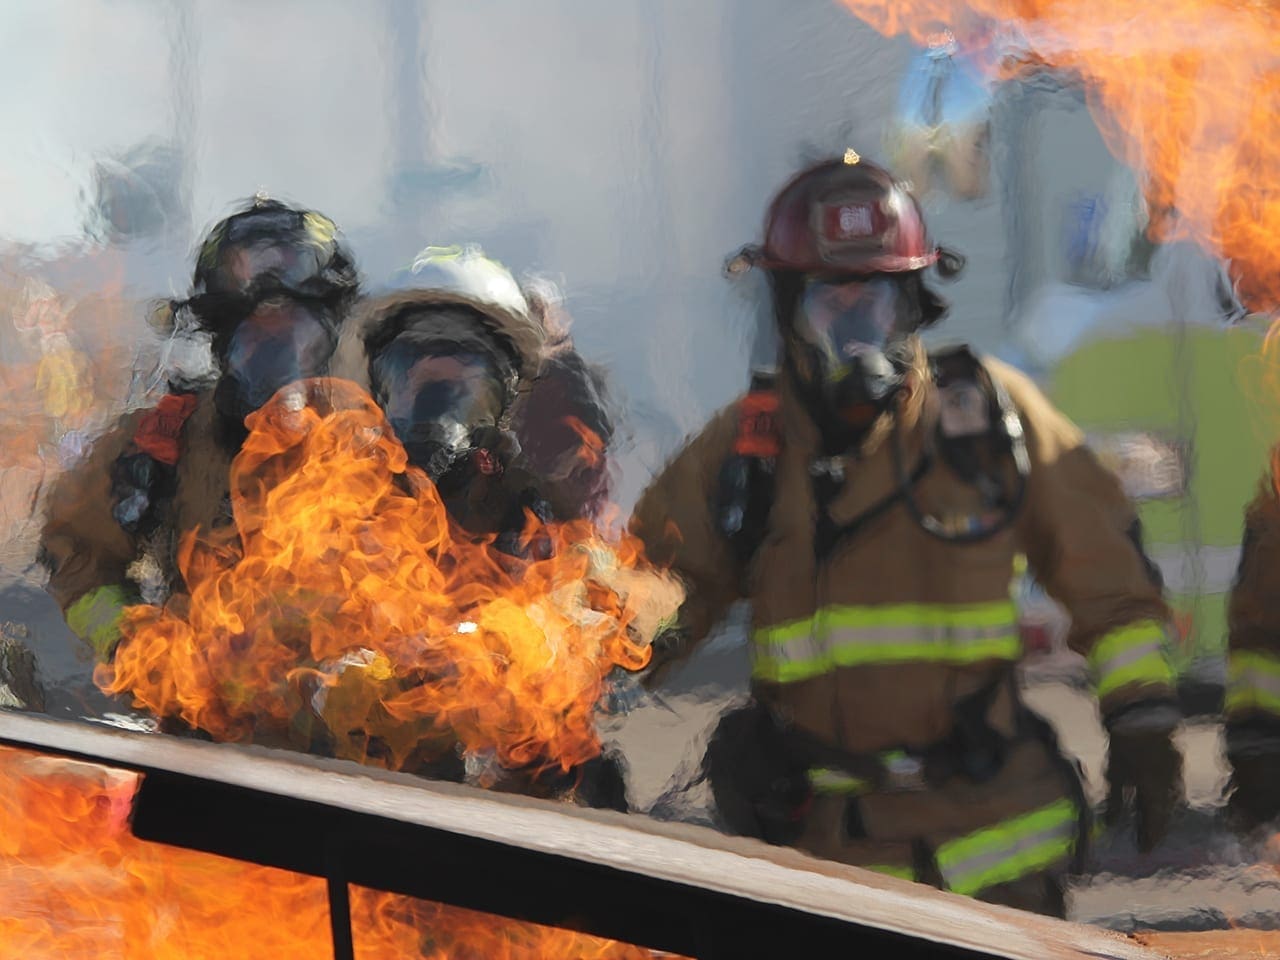 Firefighters stand before a blaze in this stock photograph.